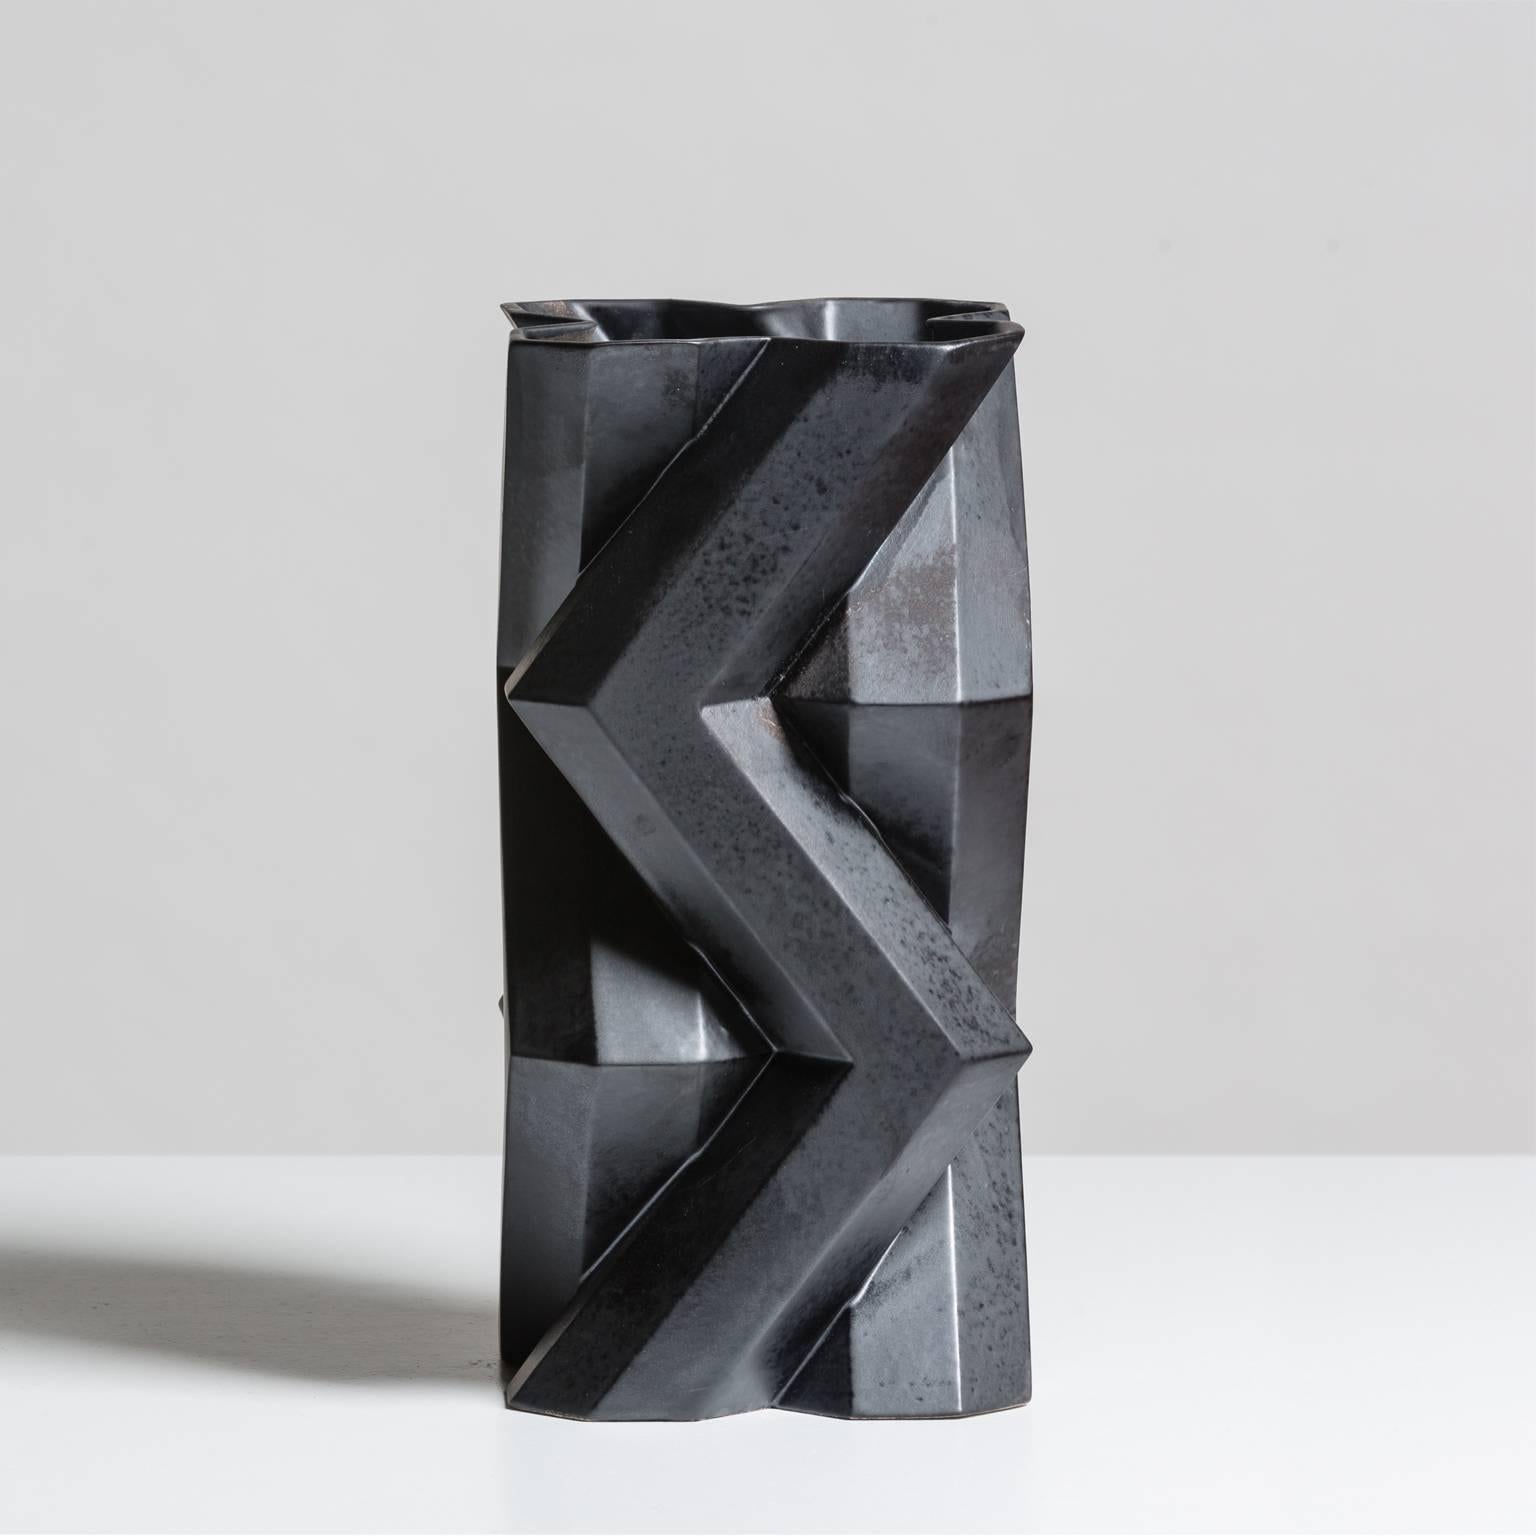 Designer Lara Bohinc explores the marriage of ancient and futuristic form in the new Fortress Vase range, which has created a more complex geometric and modern structure from the original inspiration of the octagonal towers at the Diocletian Palace